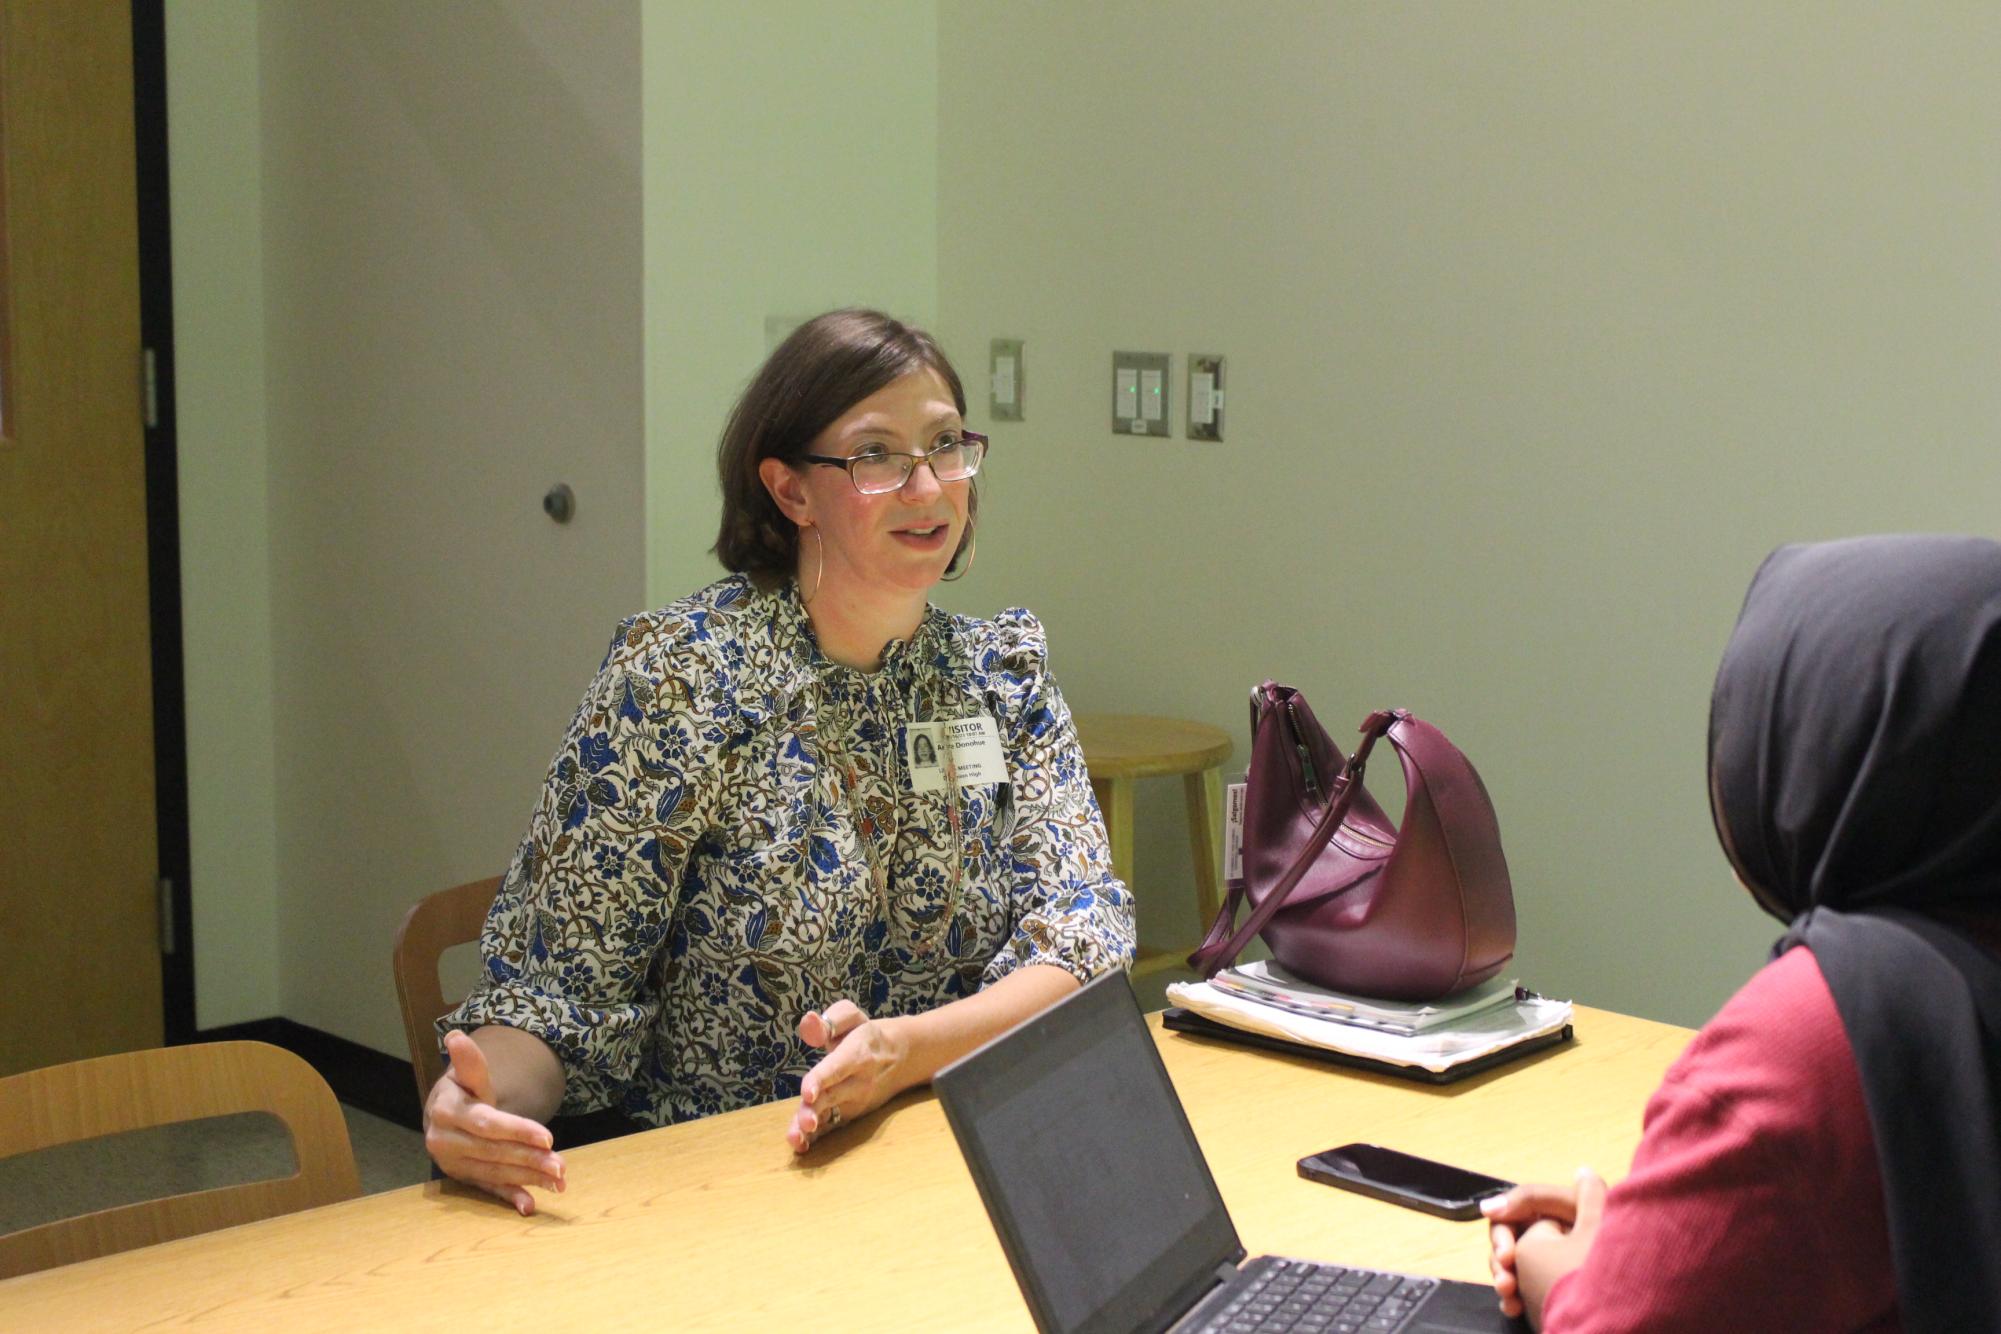 School Board At-Large Candidate, Anne Donohue, sat down for a one-on-one interview about her campaign with Alla Abdelhalim.